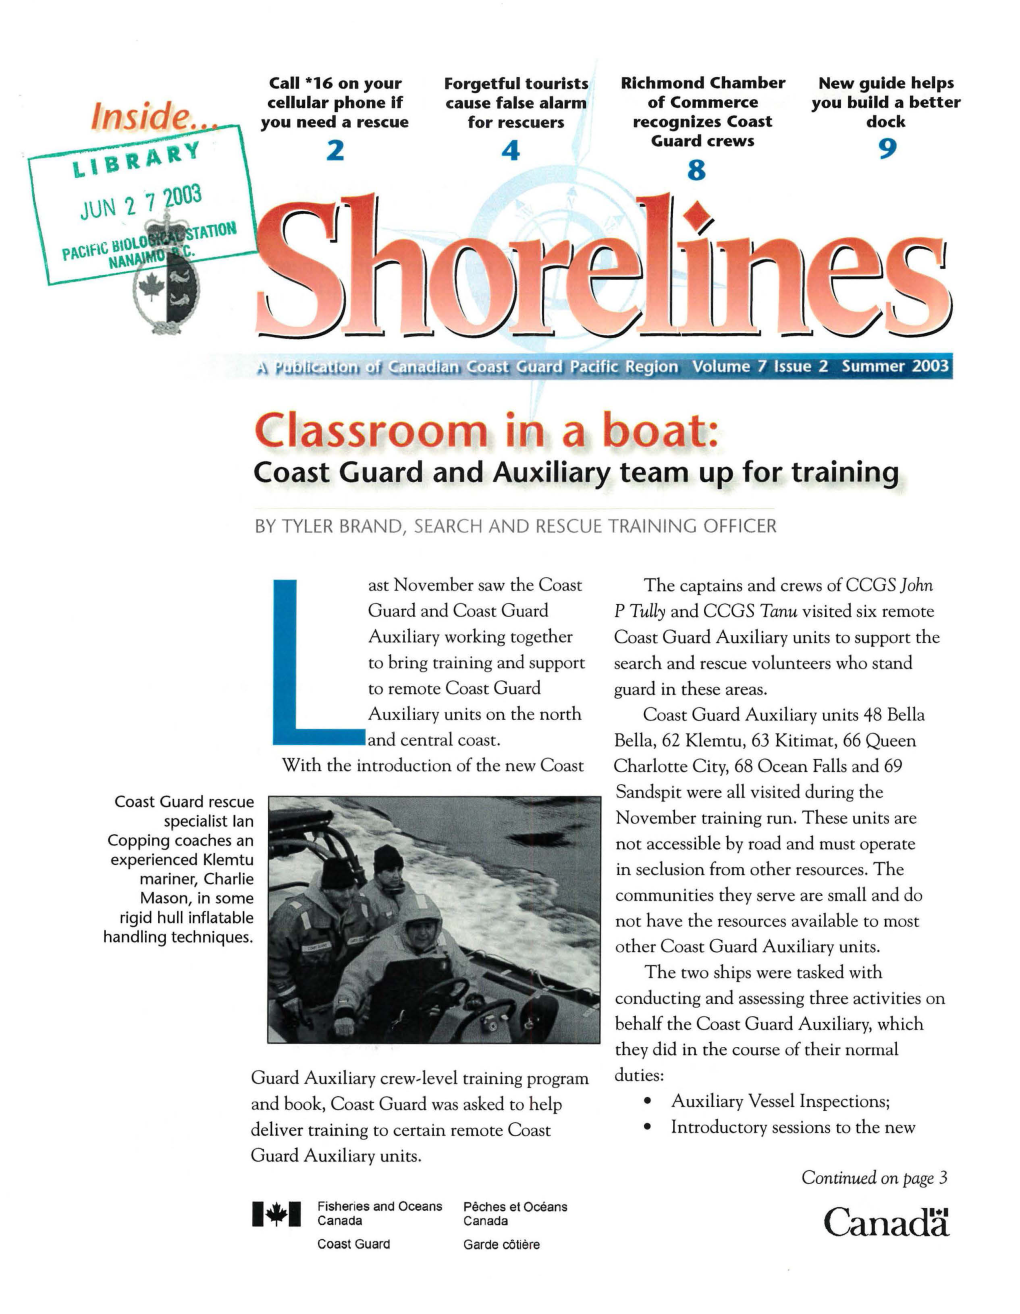 Coast Guard and Auxiliary Team up for Training